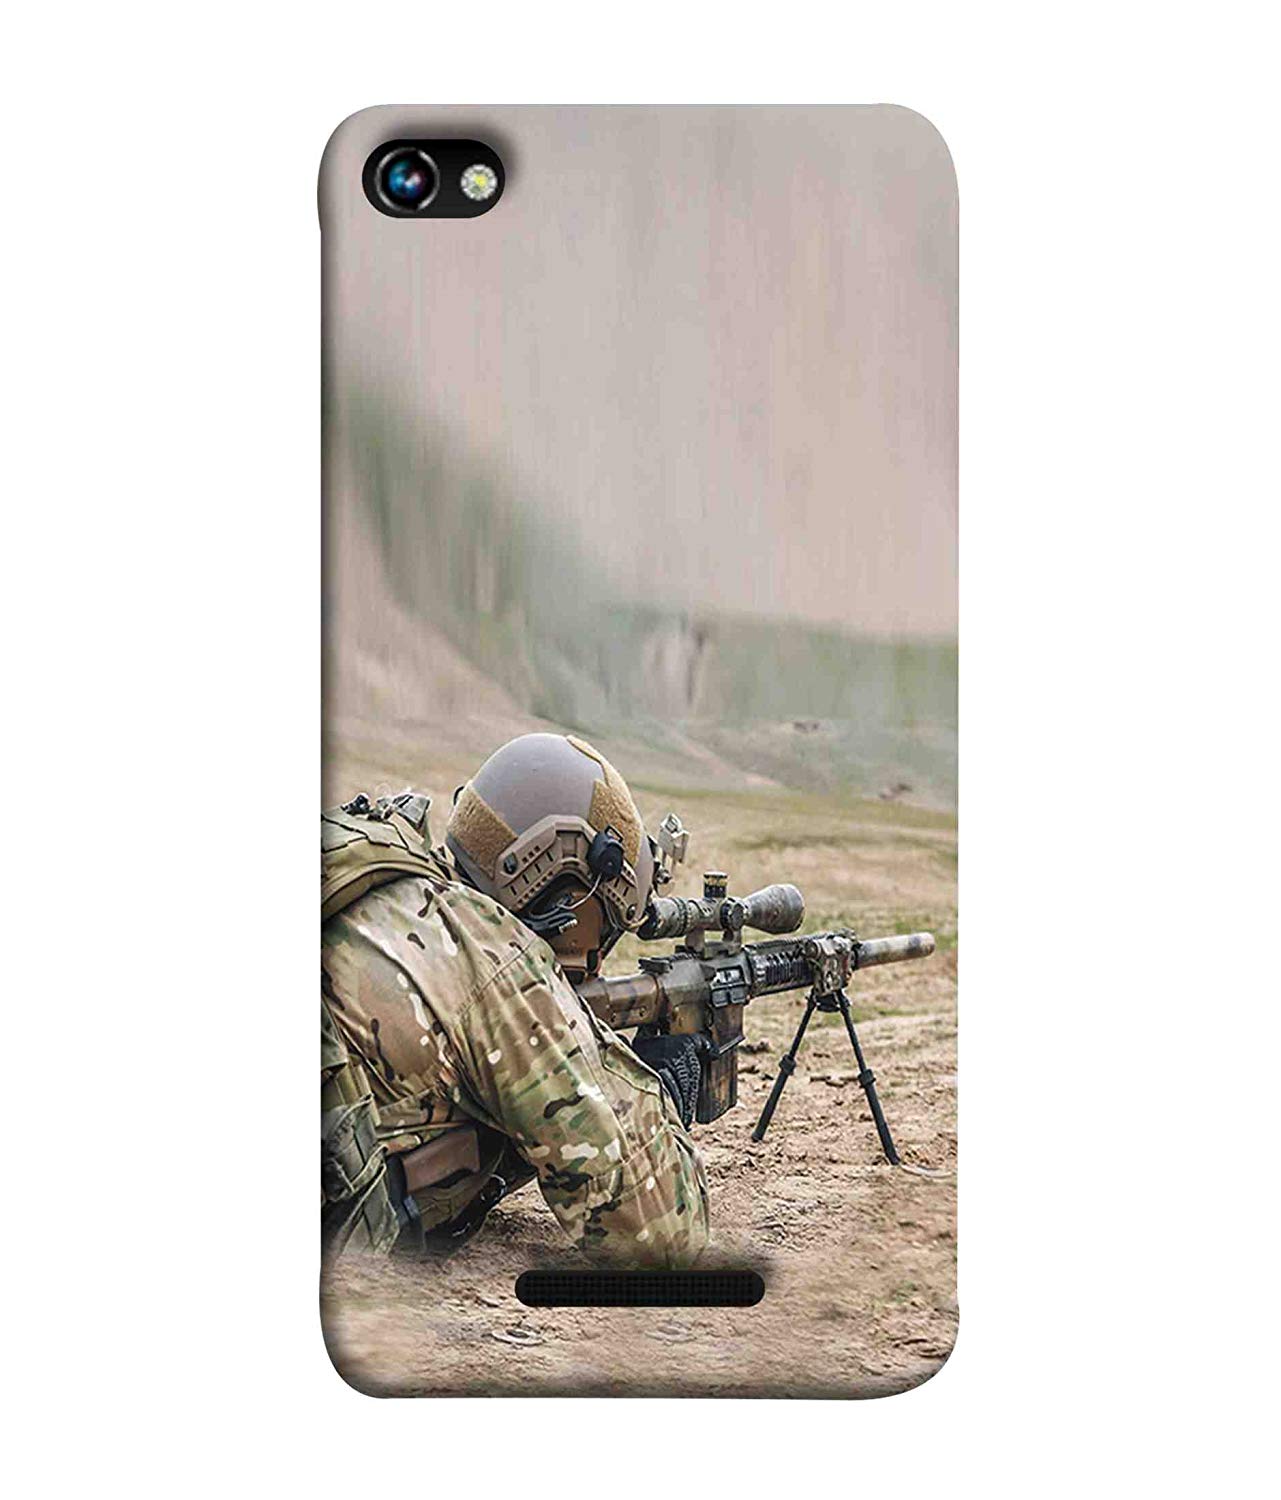 Indian Military Design Phone Cover , HD Wallpaper & Backgrounds